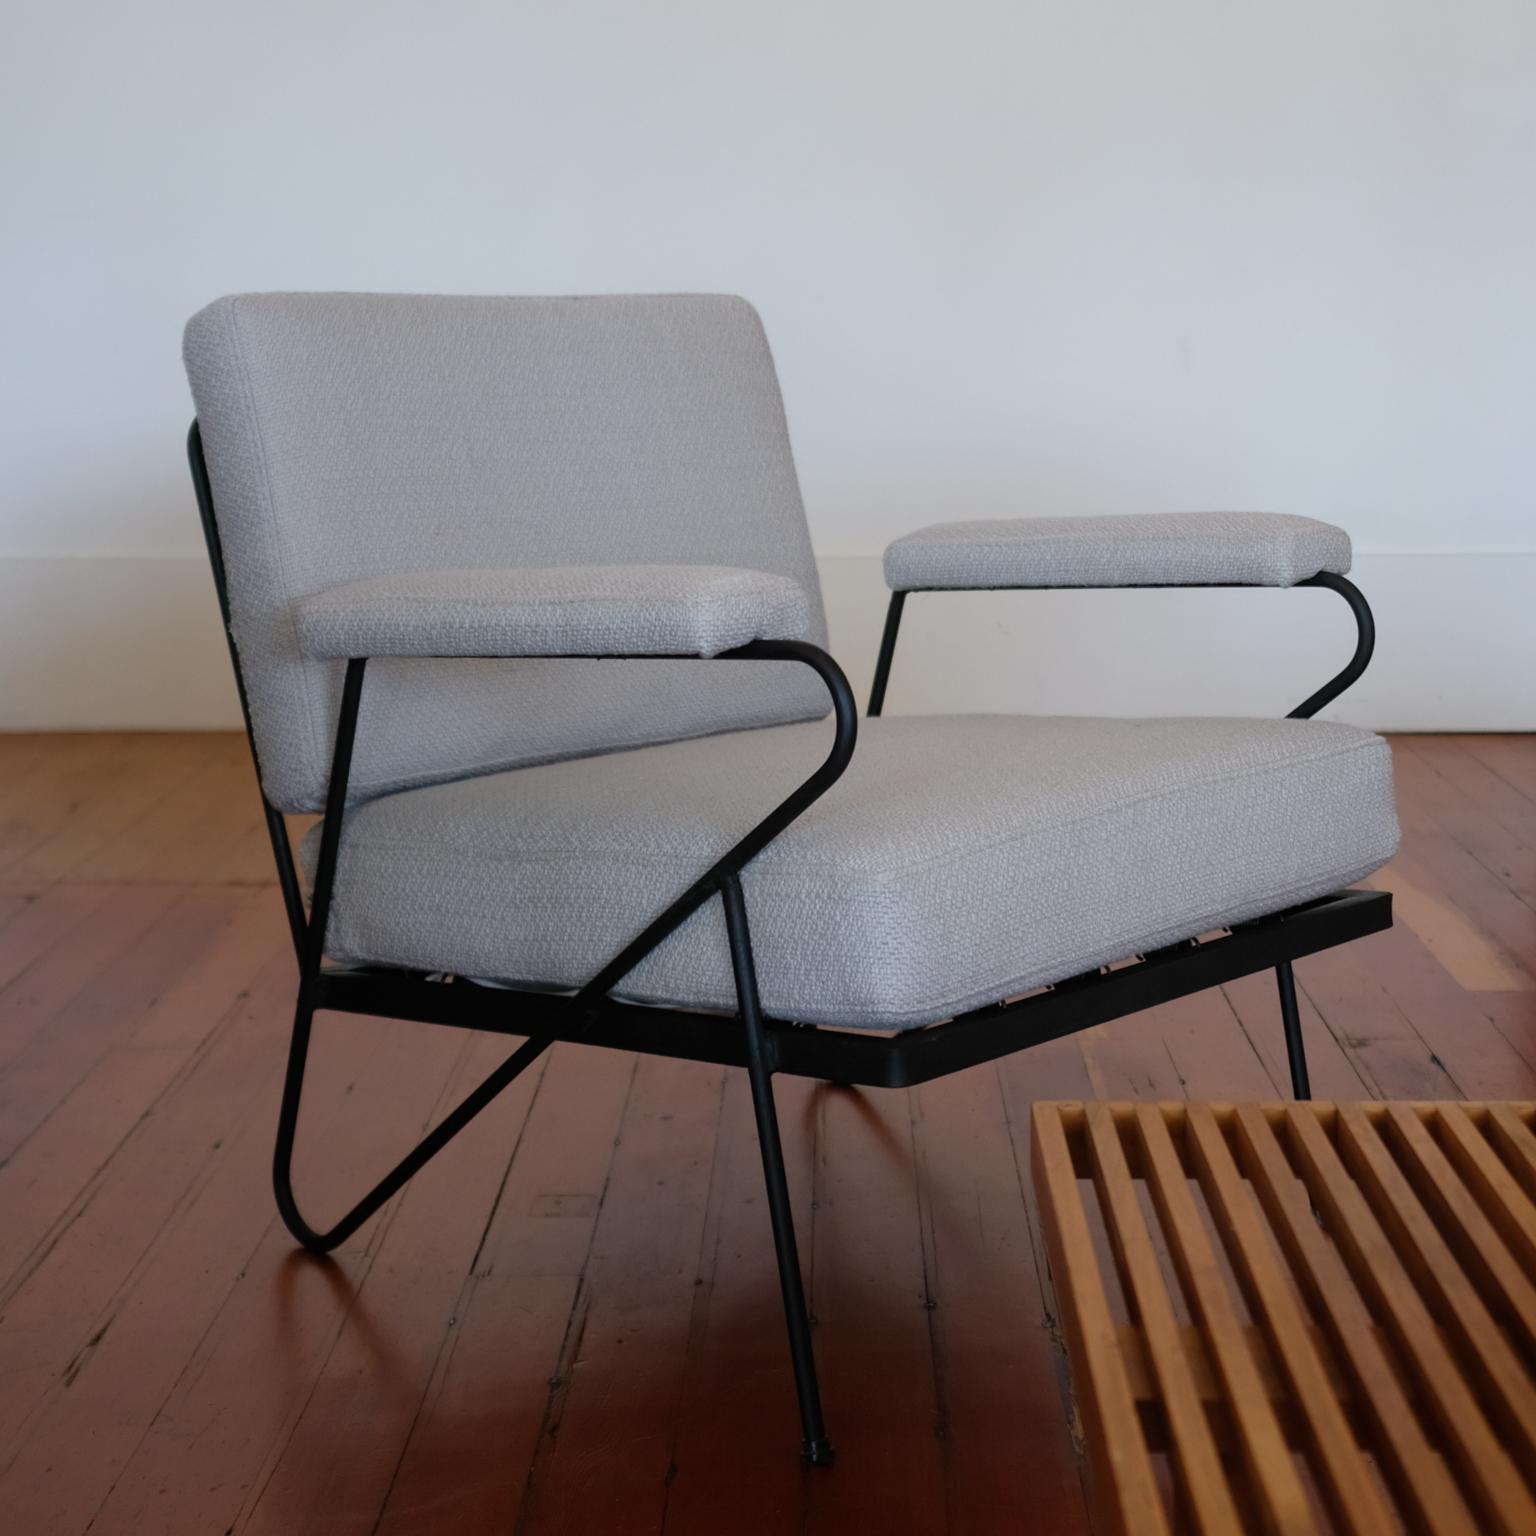 Iron lounge chair by Inco. New upholstery. 

Inco was a small furniture company in the Atwater Village area of Los Angeles. Joseph Inco (1909-1989) was the president and also designed furniture for the company. Milo Baughman was also a designer